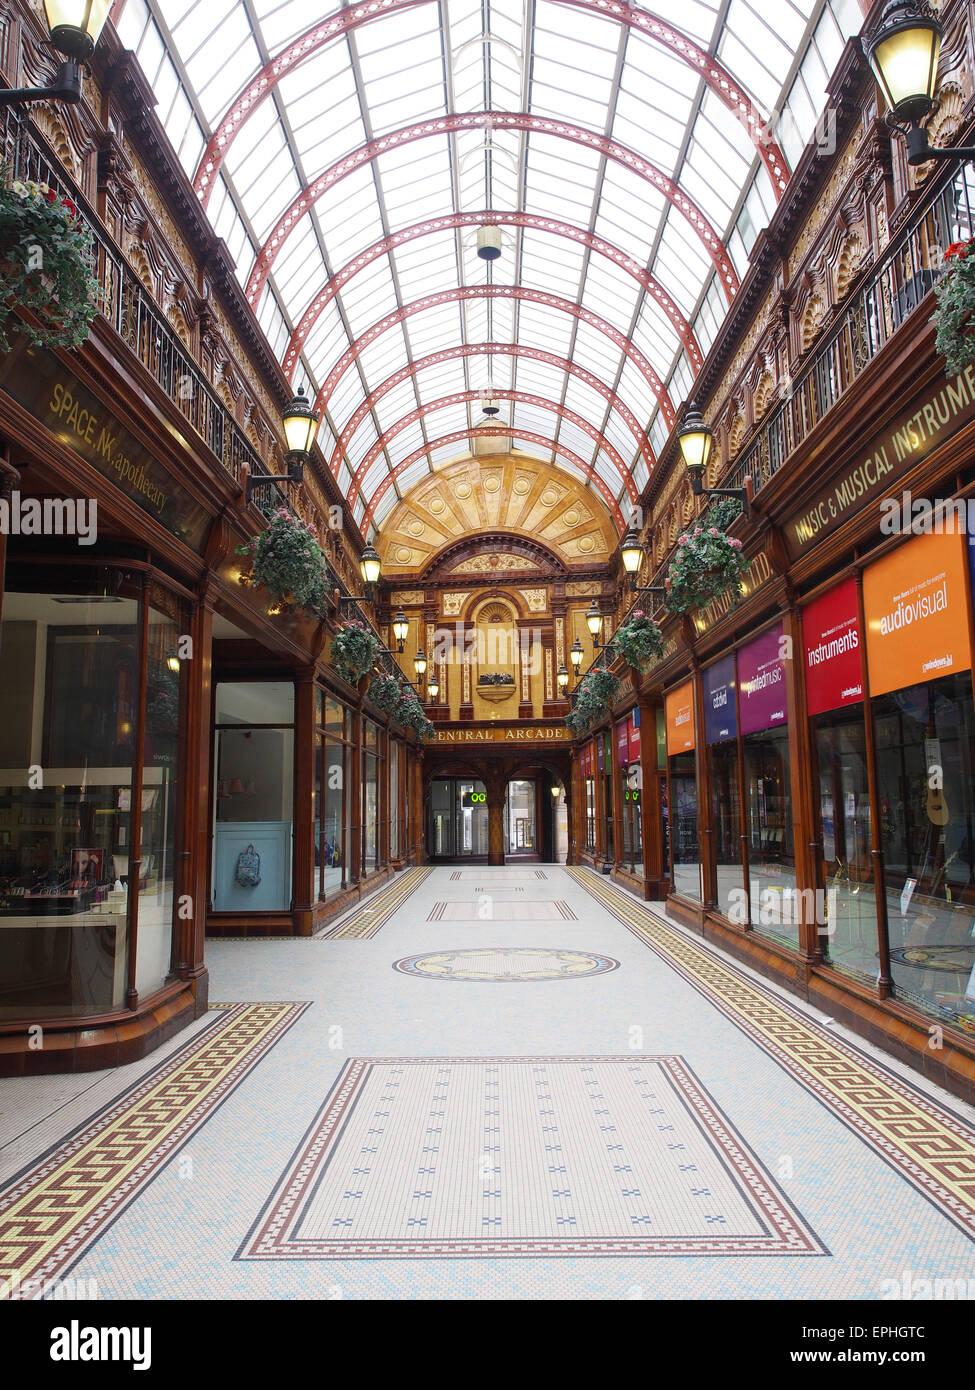 Inside the Central Arcade marketplace of Grainger Town, part of Newcastle upon Tyne, England Stock Photo